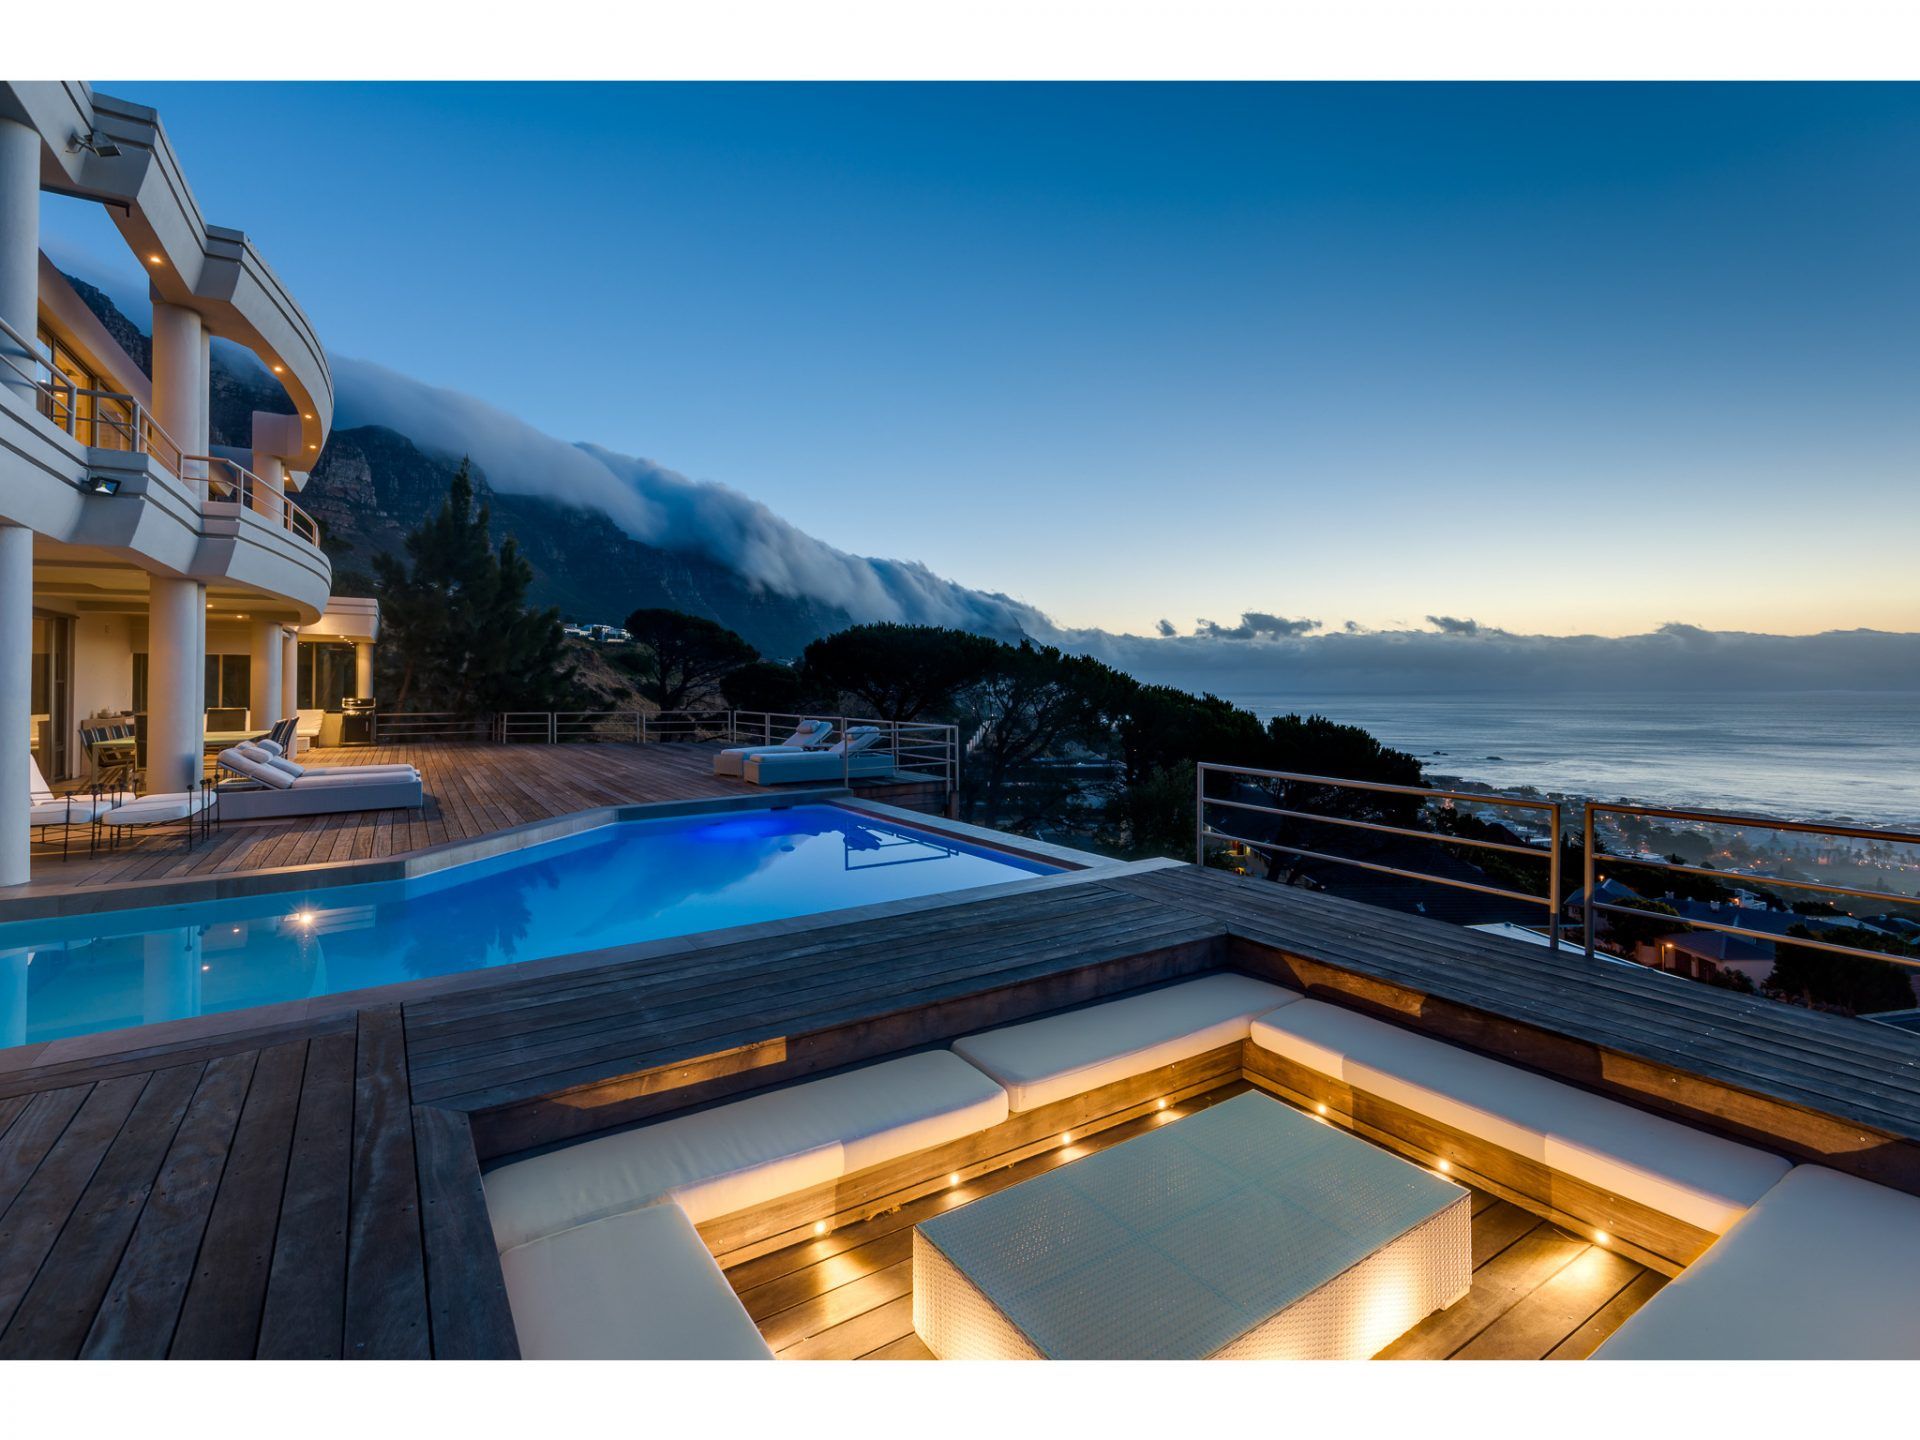 Photo 20 of Geneva Sunsets accommodation in Camps Bay, Cape Town with 6 bedrooms and 7 bathrooms